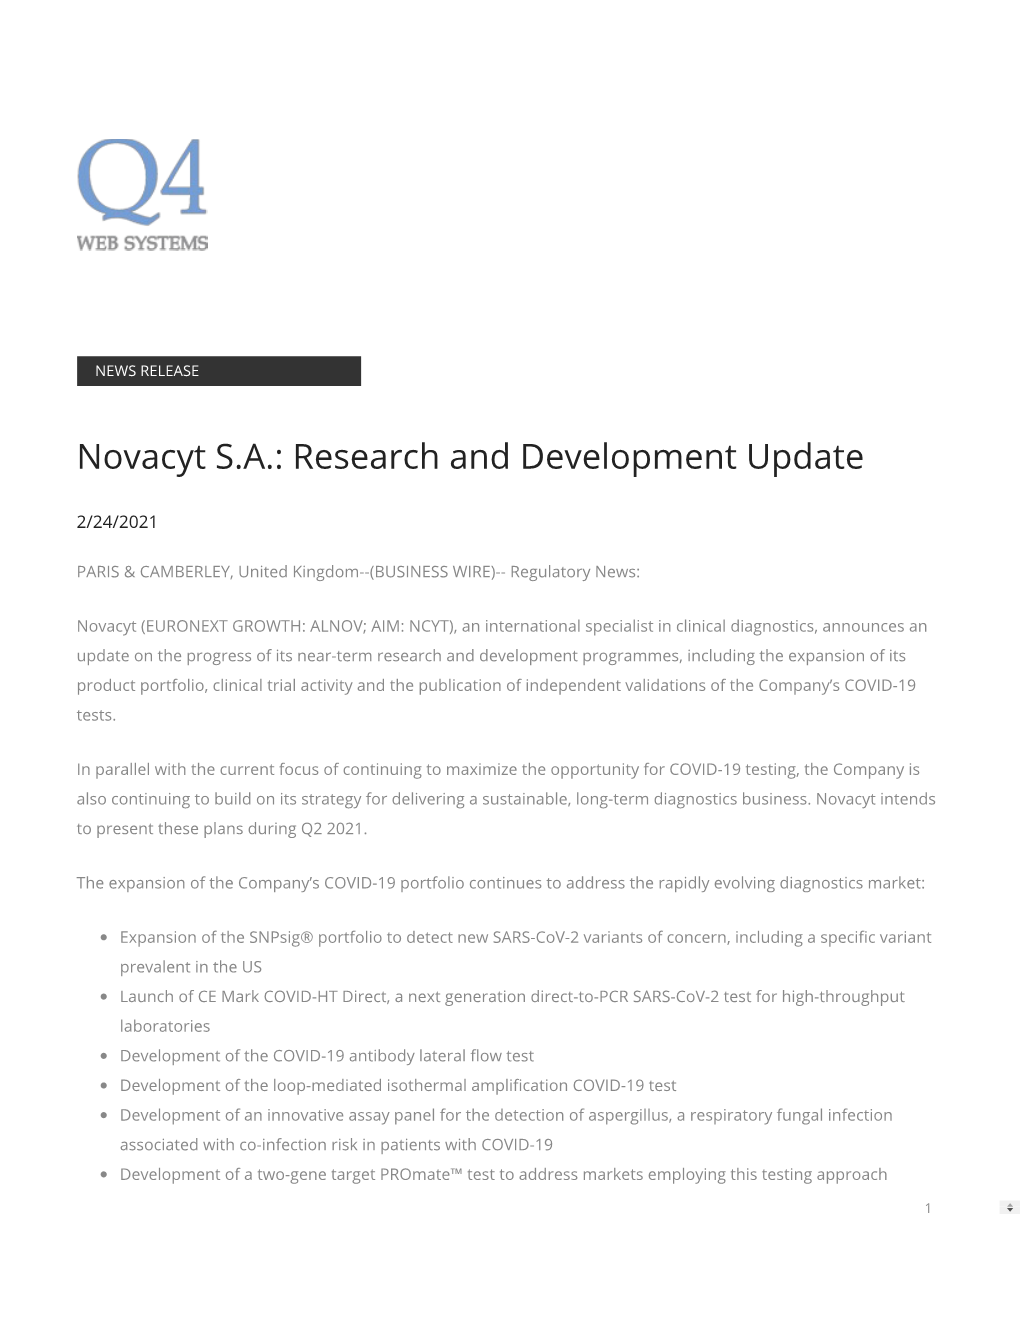 Novacyt S.A.: Research and Development Update